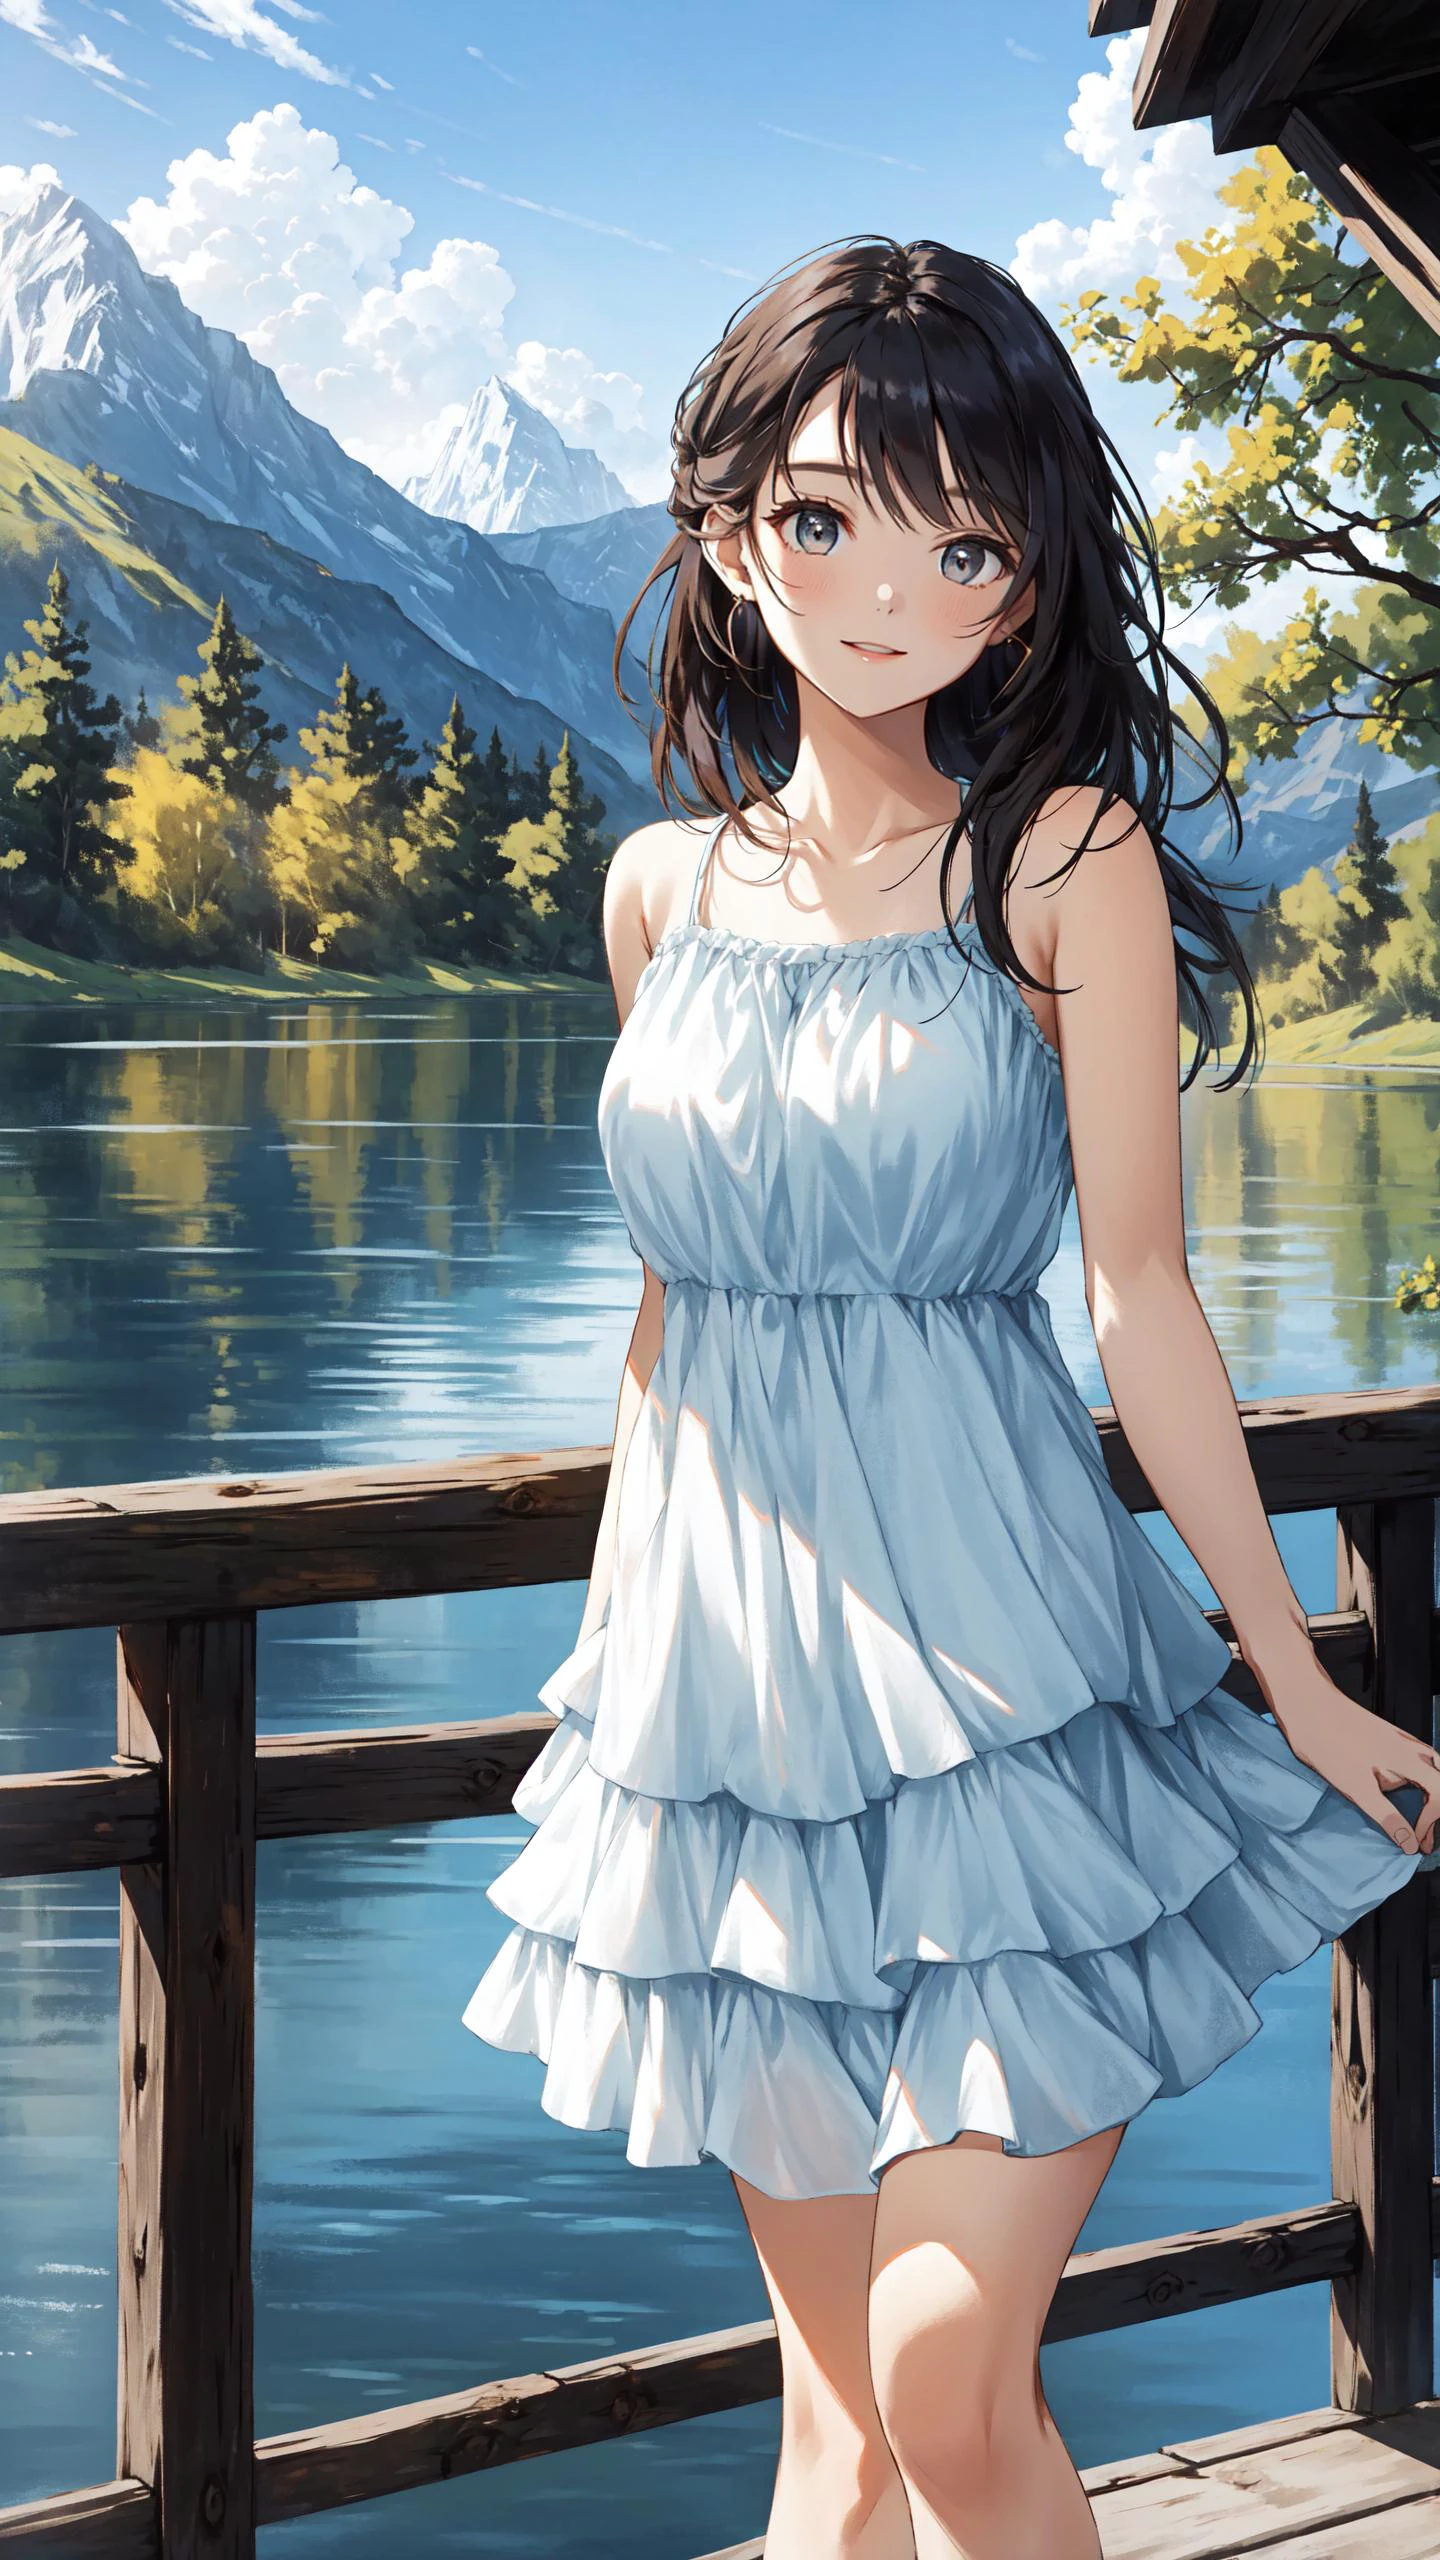 (Layered Depth, Parallax Effect, Soft focus foreground:1.3) (scenic outdoor lake setting), (sunlit pier), young adult woman, casual summer fashion, ((dipping legs into the lake)), relaxed pose, breezy hairstyle, subtle makeup, (lightweight fabric, flowing dress), nature-inspired colors, serene expression, (background: lush greenery, distant mountains), warm afternoon light, (sense of tranquility and connection with nature)